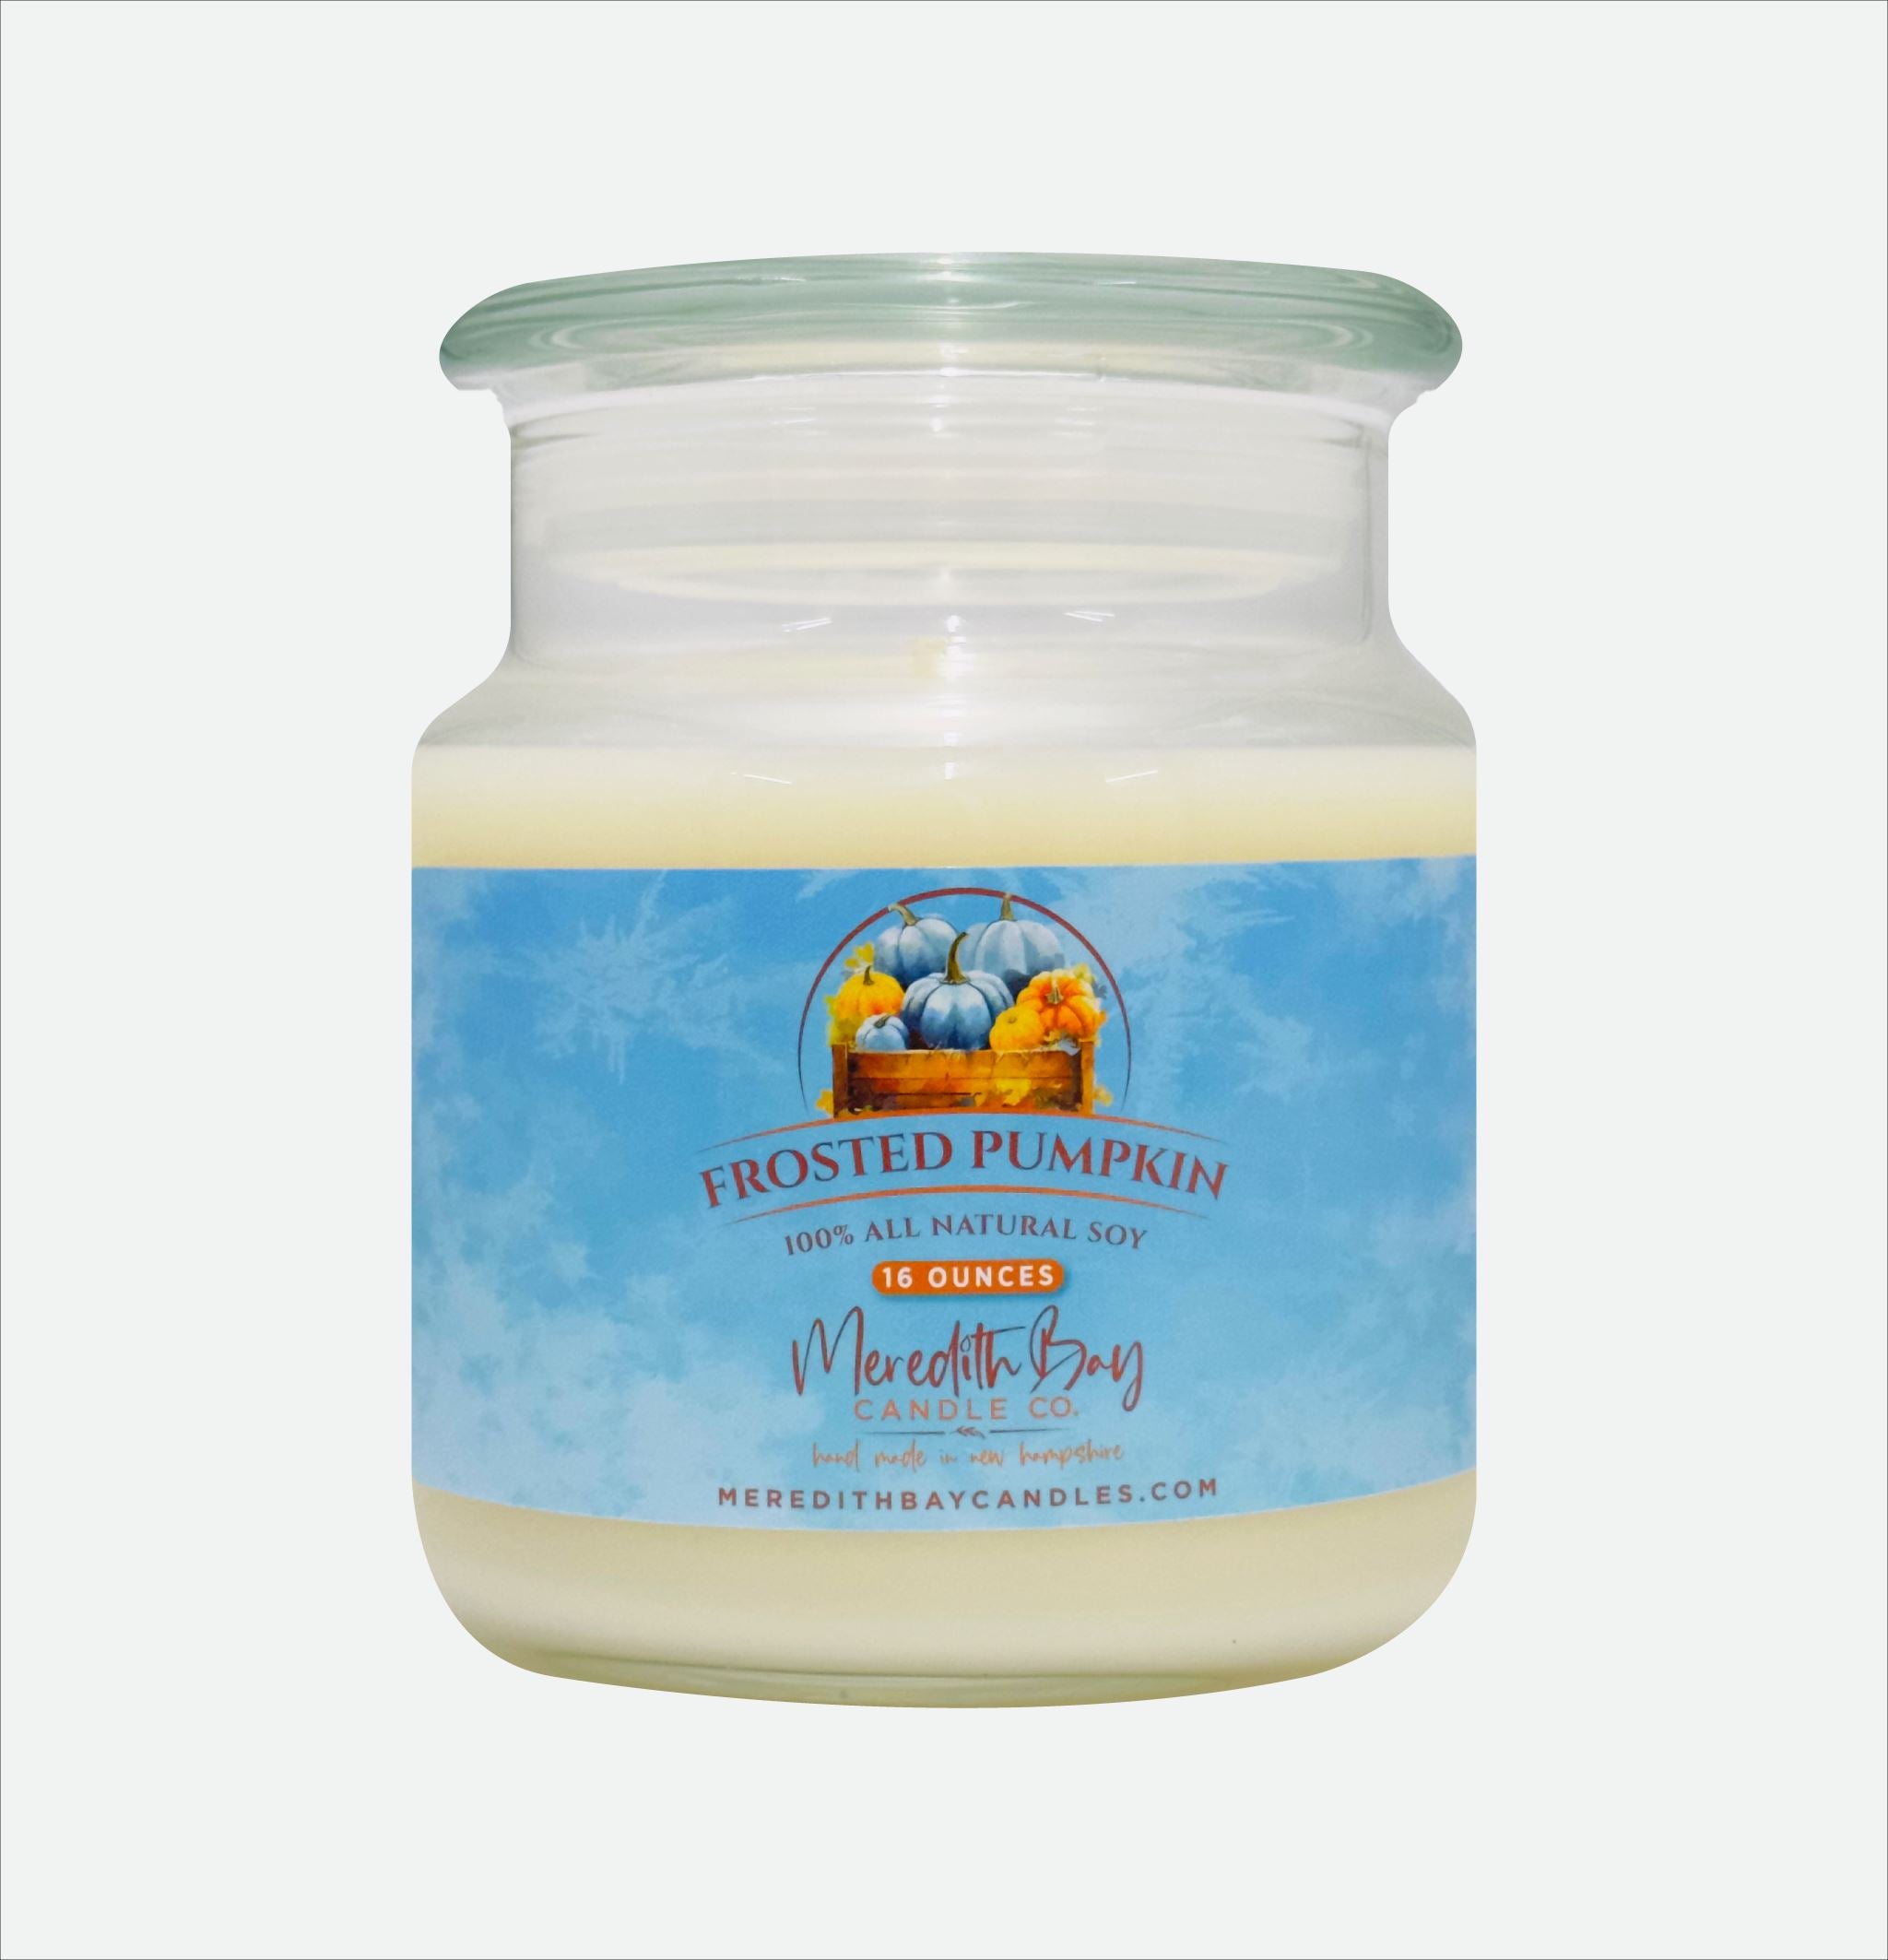 Frosted Pumpkin Soy Candle Meredith Bay Candle Co 16.0 Oz 